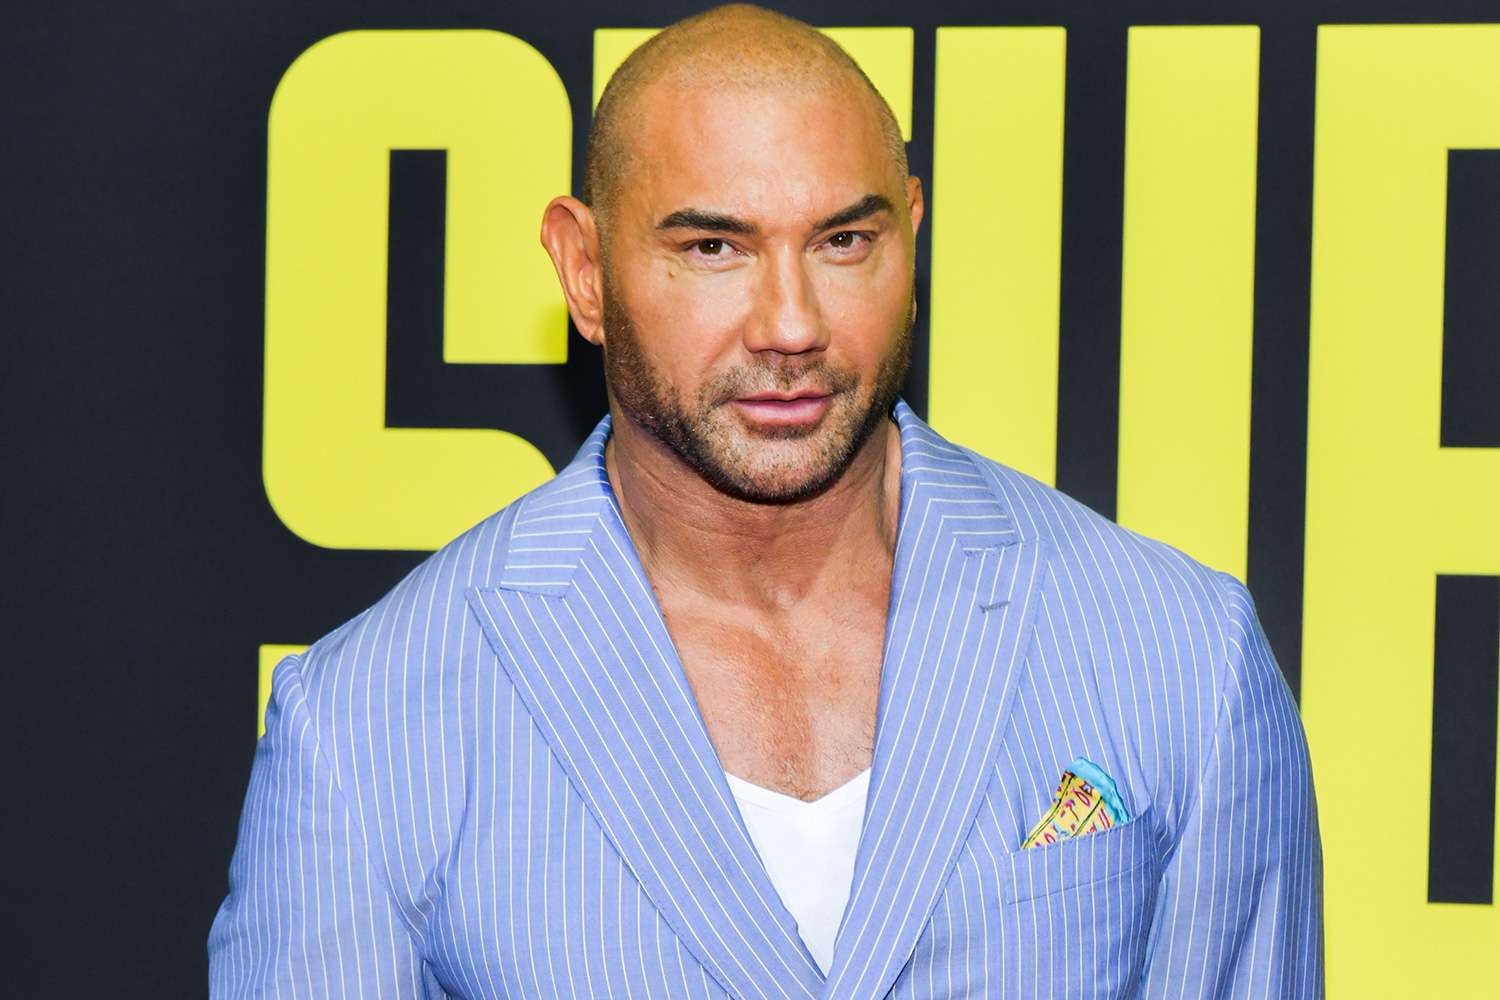 Dave Bautista Is Unrecognizable With Long Hair in Throwback Photo